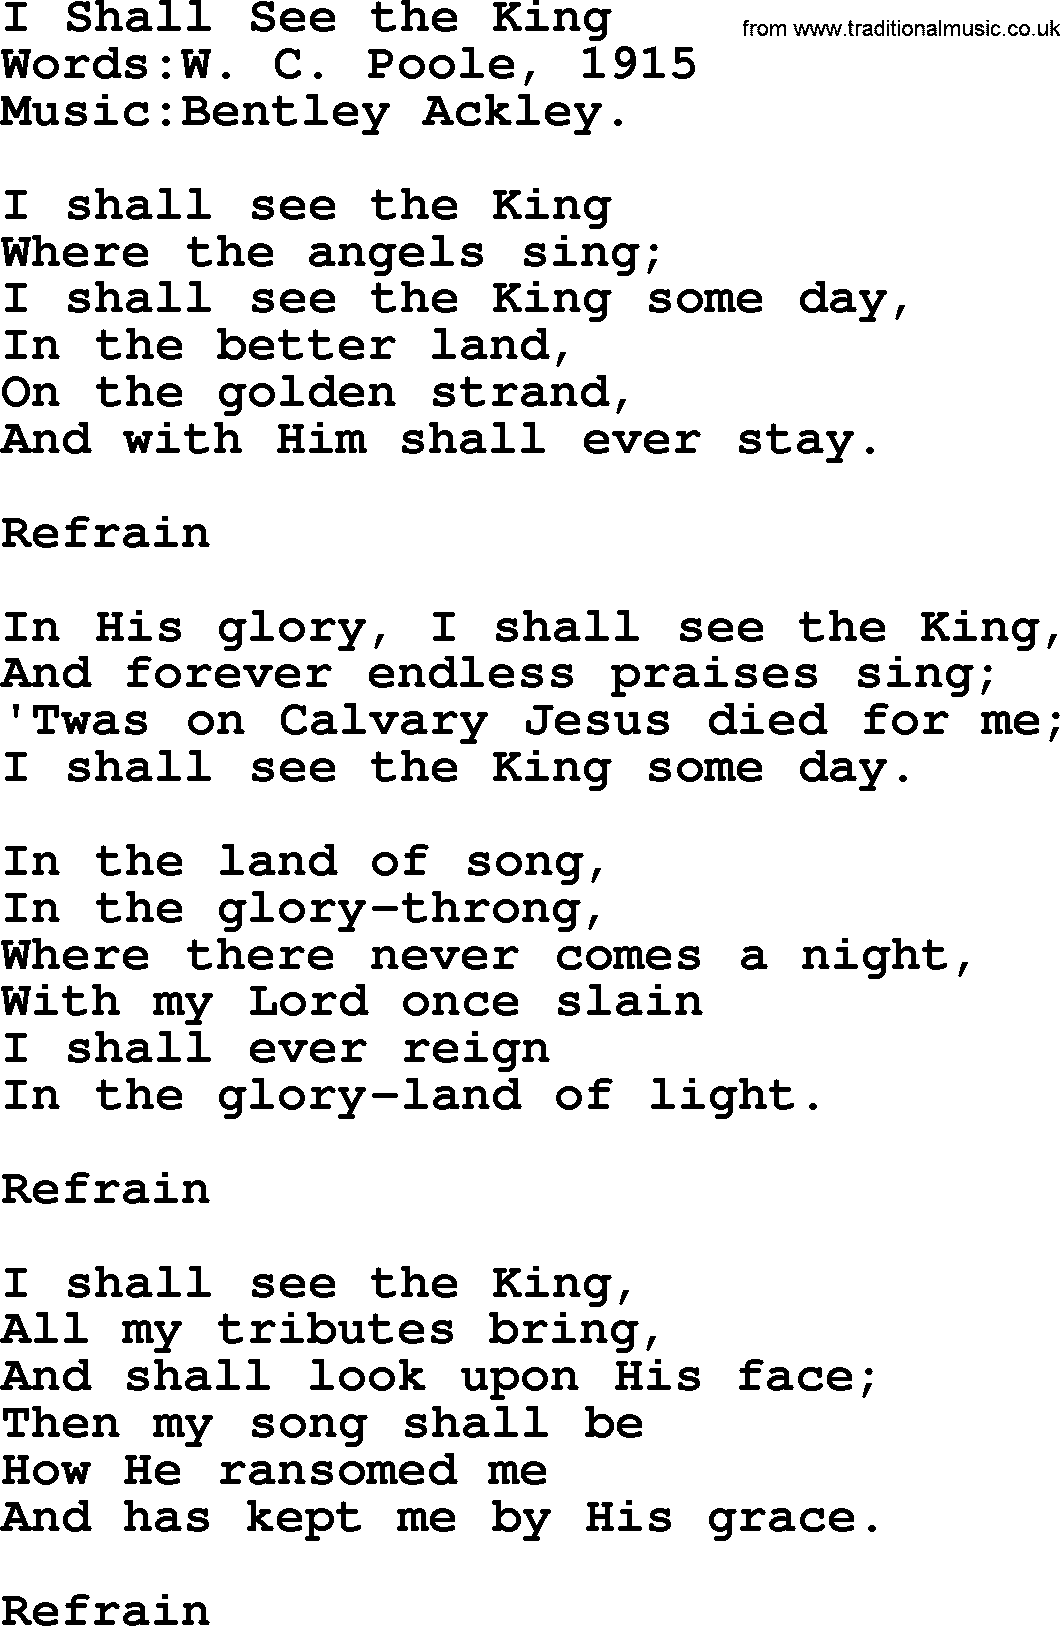 Songs and Hymns about Heaven: I Shall See The King lyrics with PDF